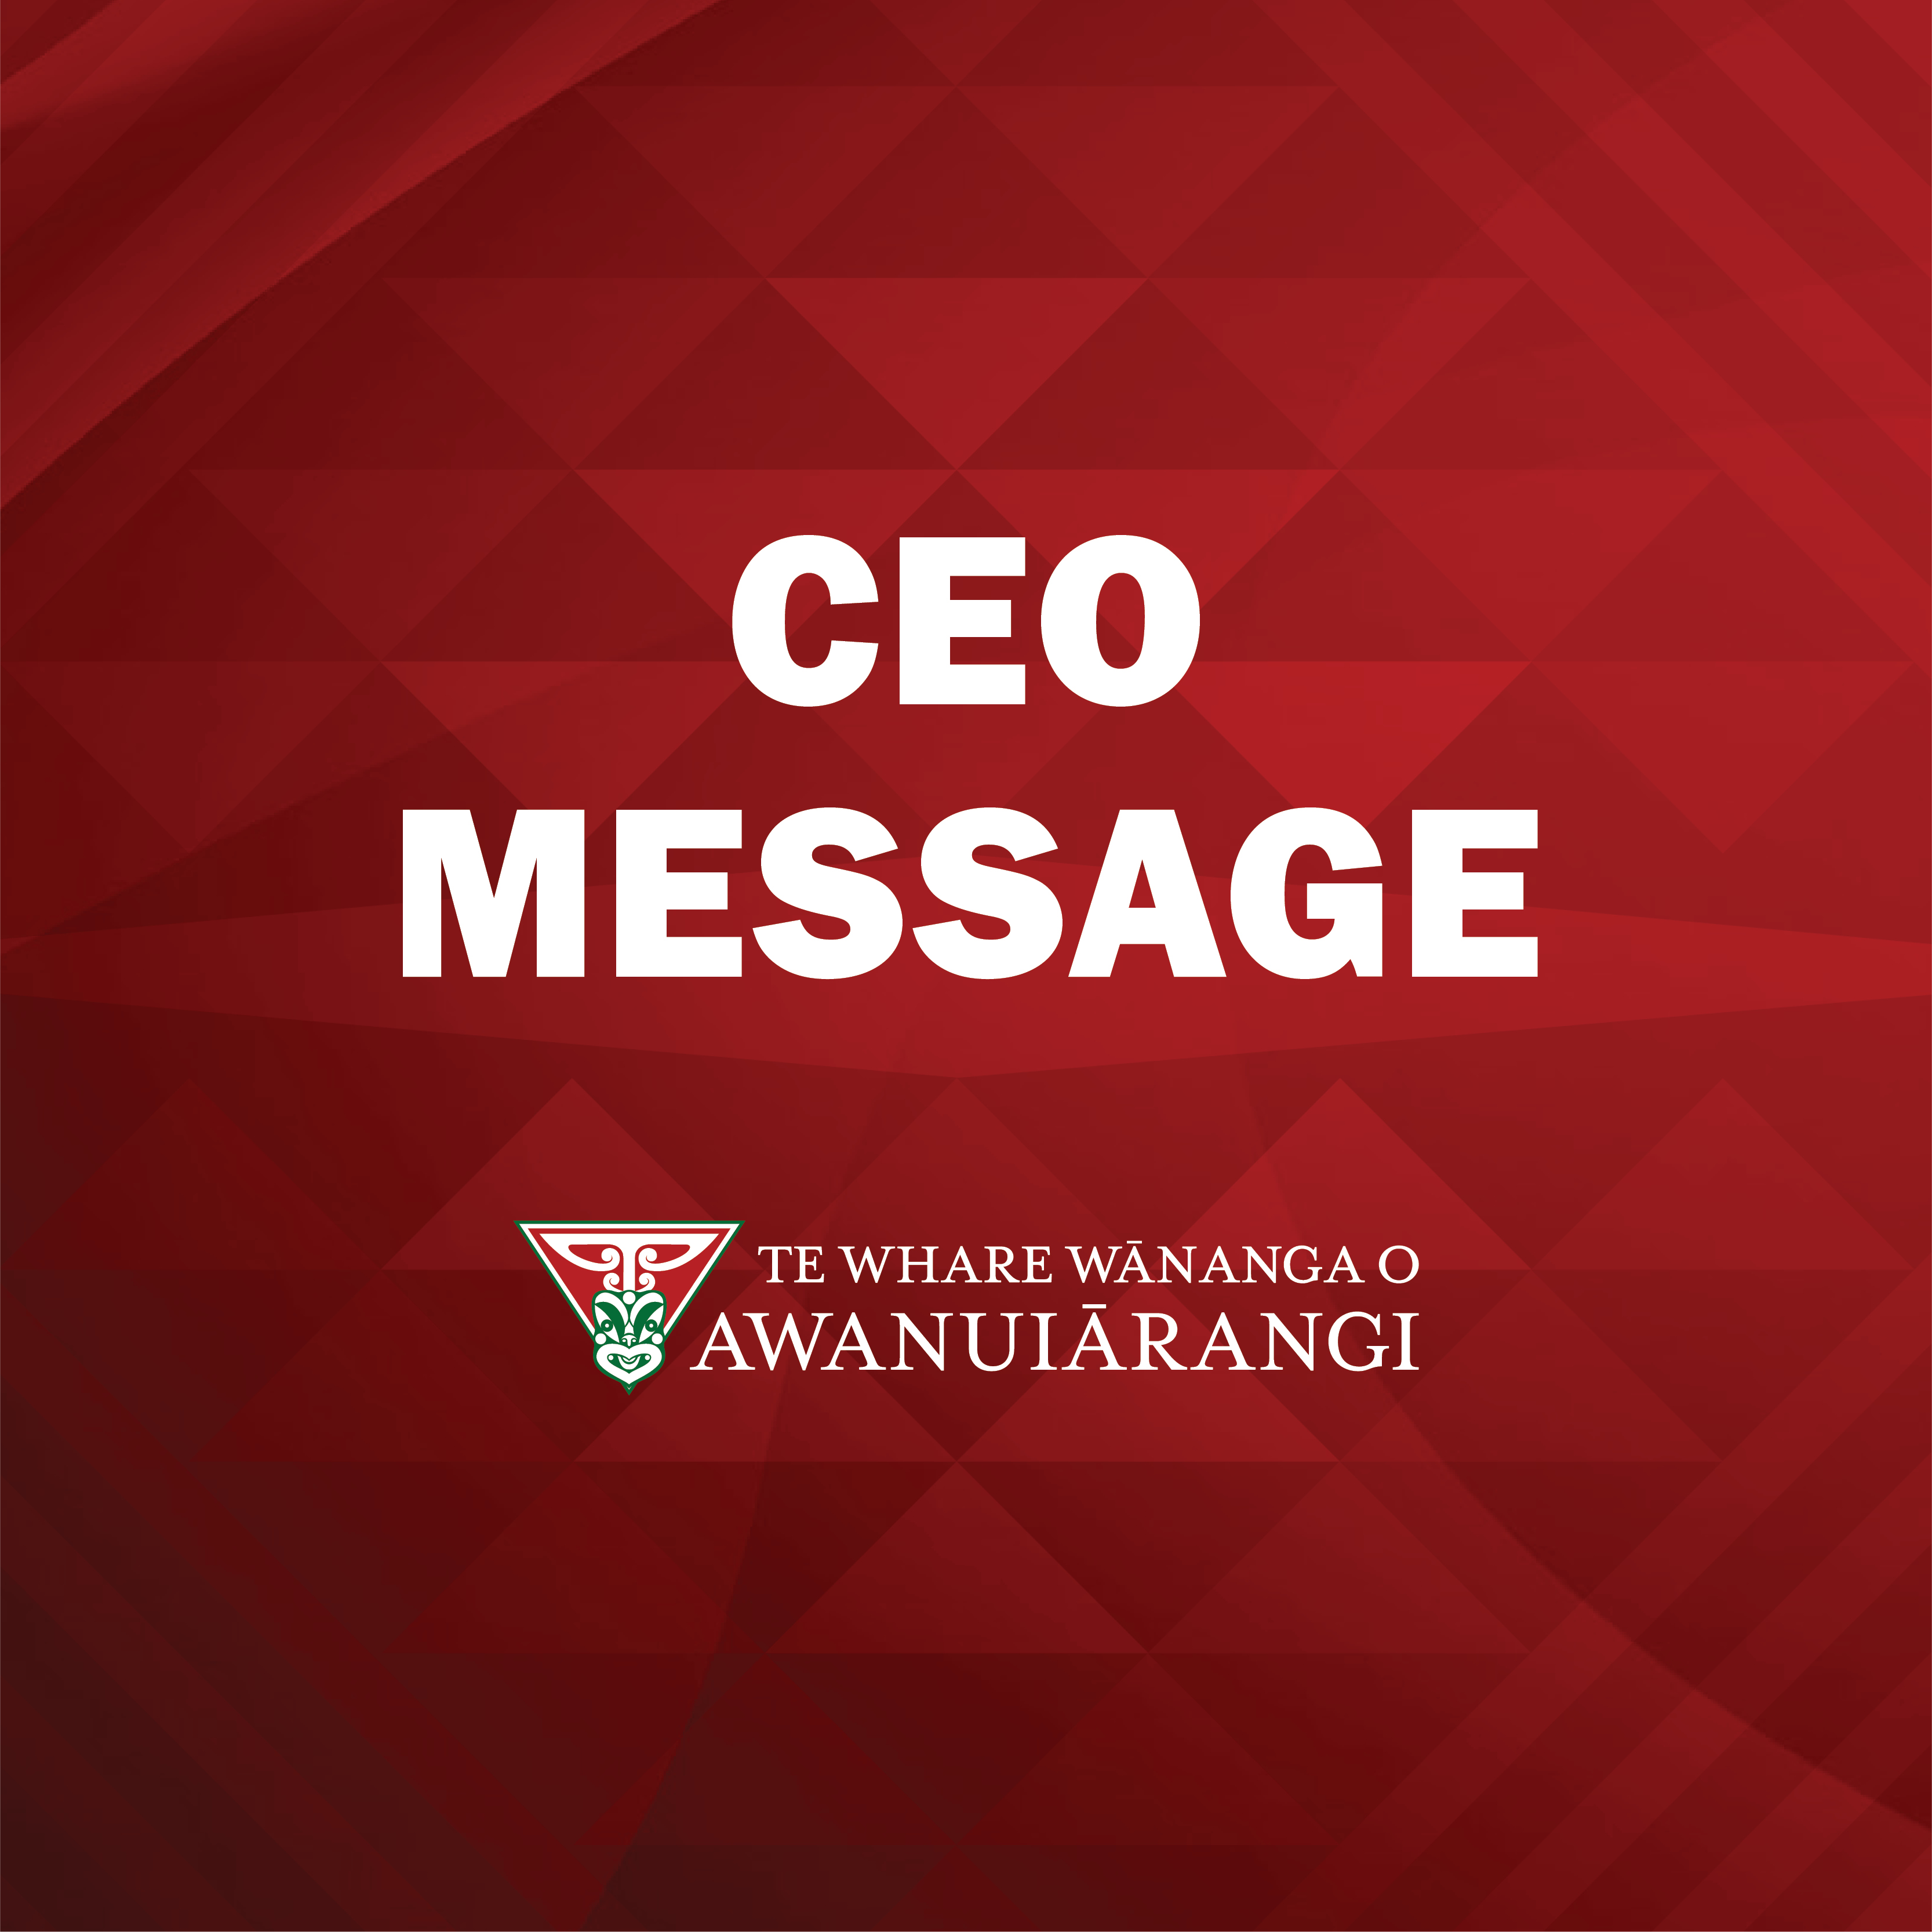 New year message from CEO 2021